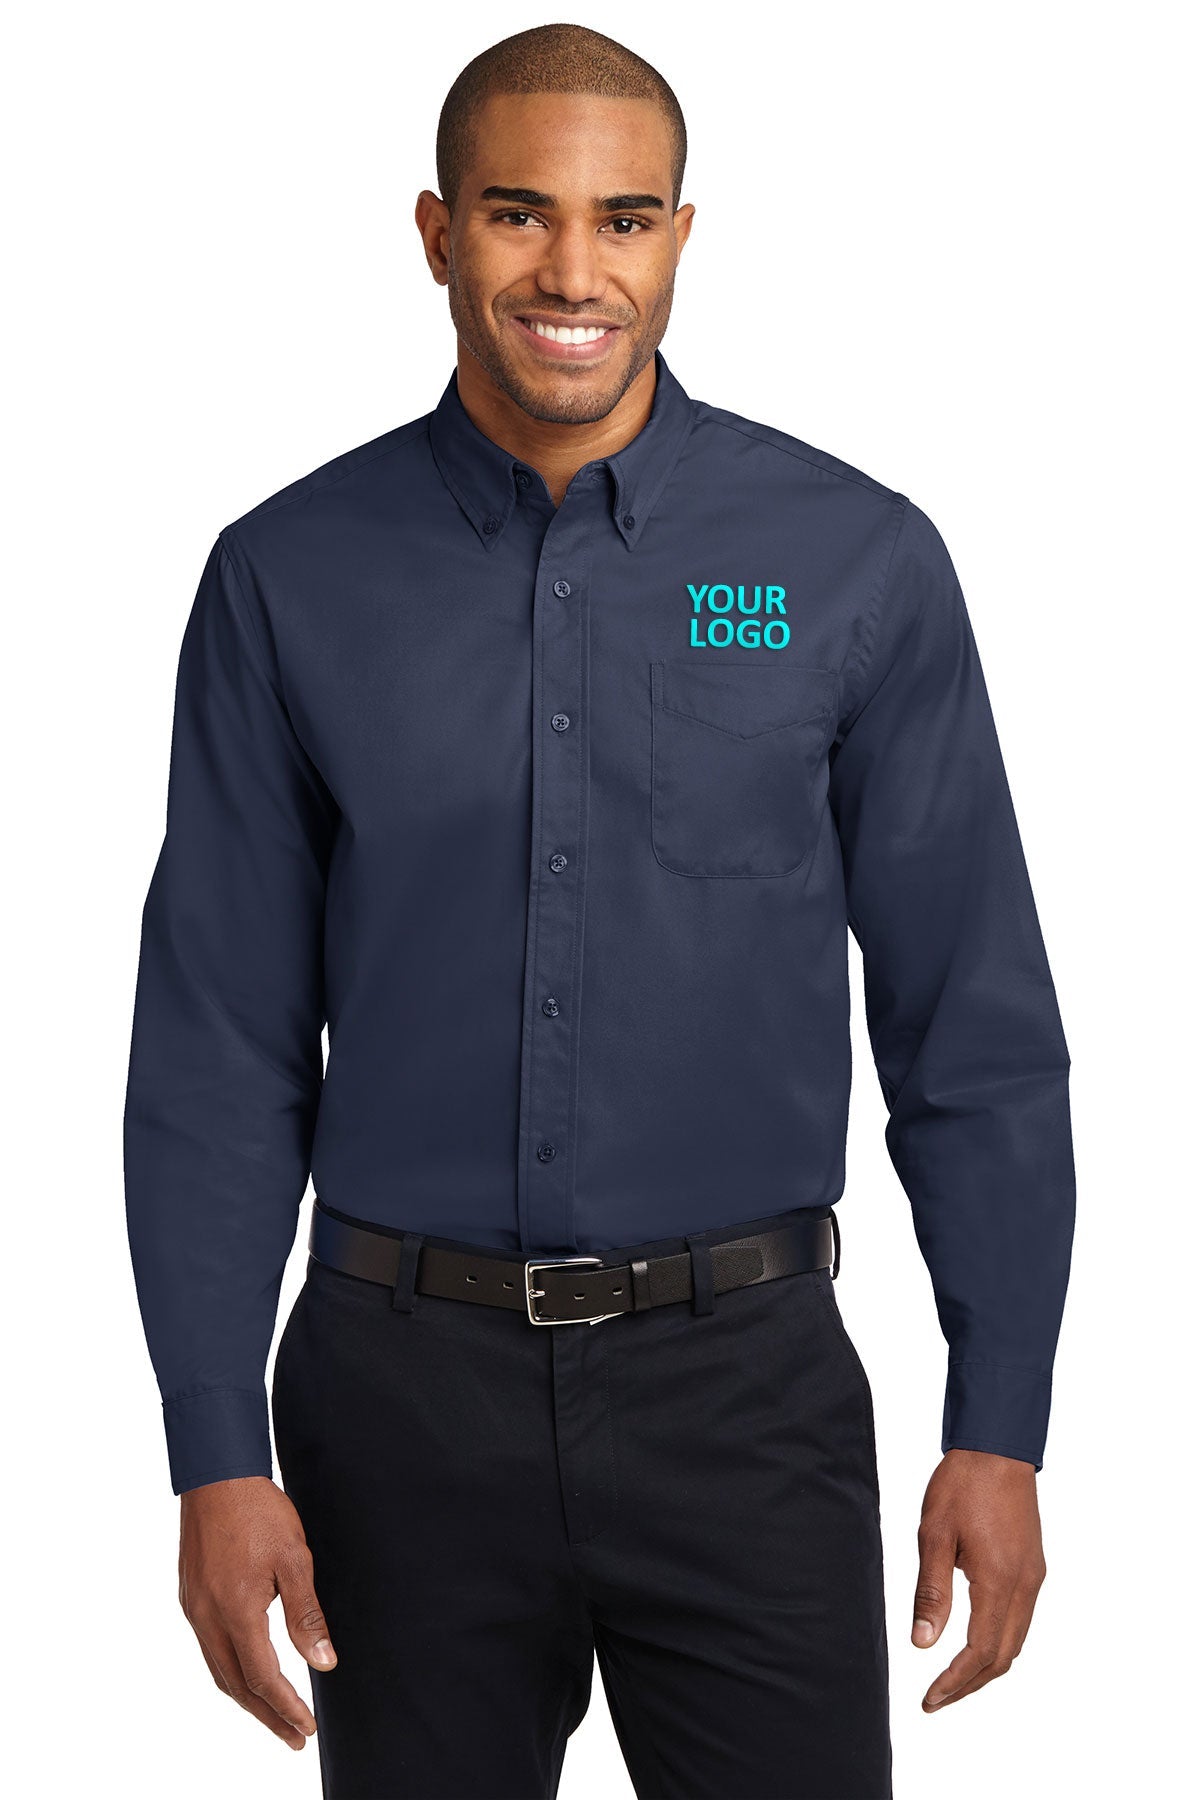 Port Authority Navy/Light Stone S608ES business shirts with company logo